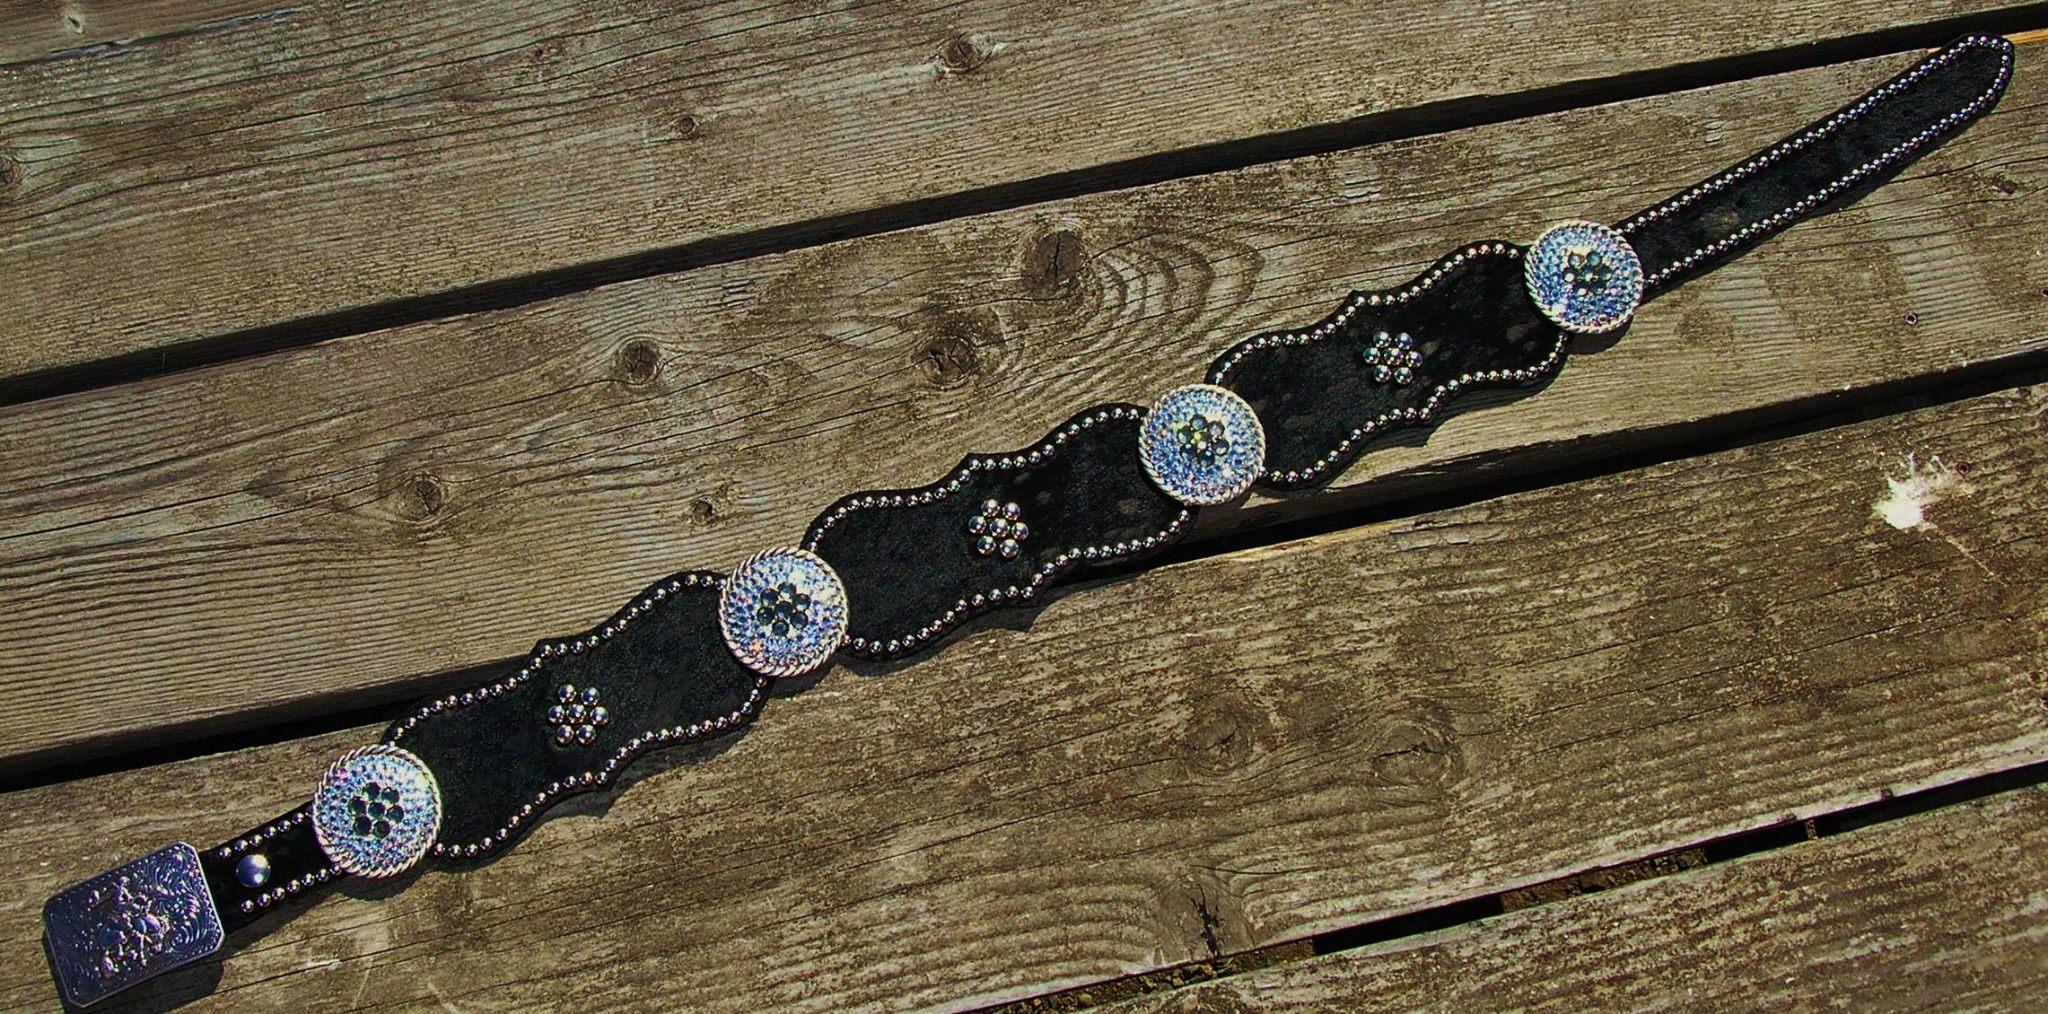 This is the belt that was donated to the Spirit Therapeutic Riding Program fundraiser Saturday night! The value is $350.